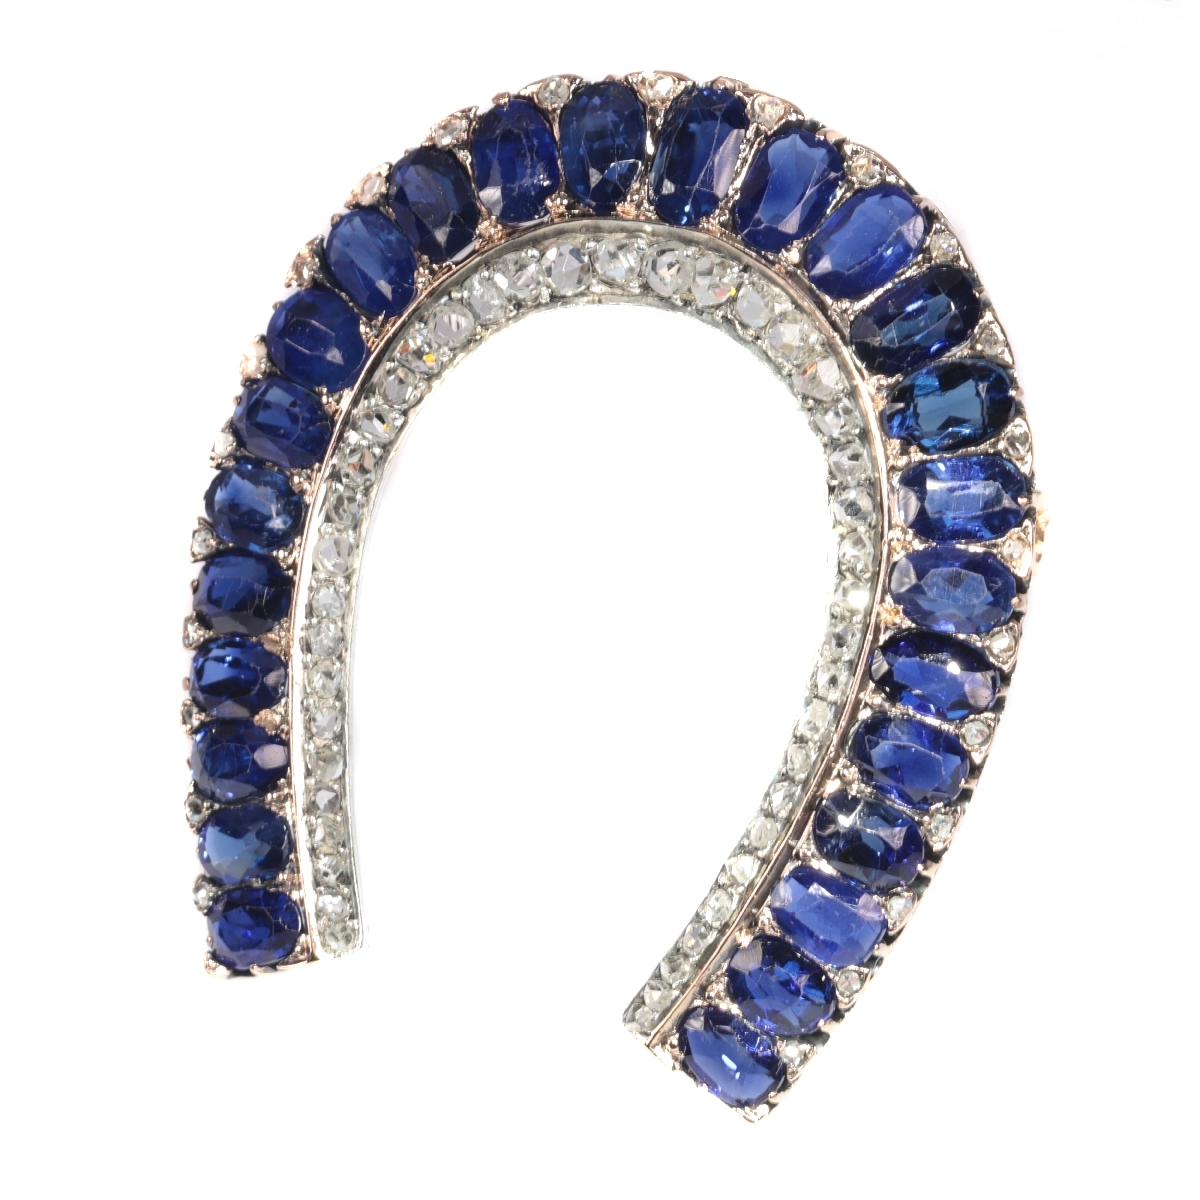 Antique Victorian brooch horse shoe with 67 diamonds and over 11 crts sapphires